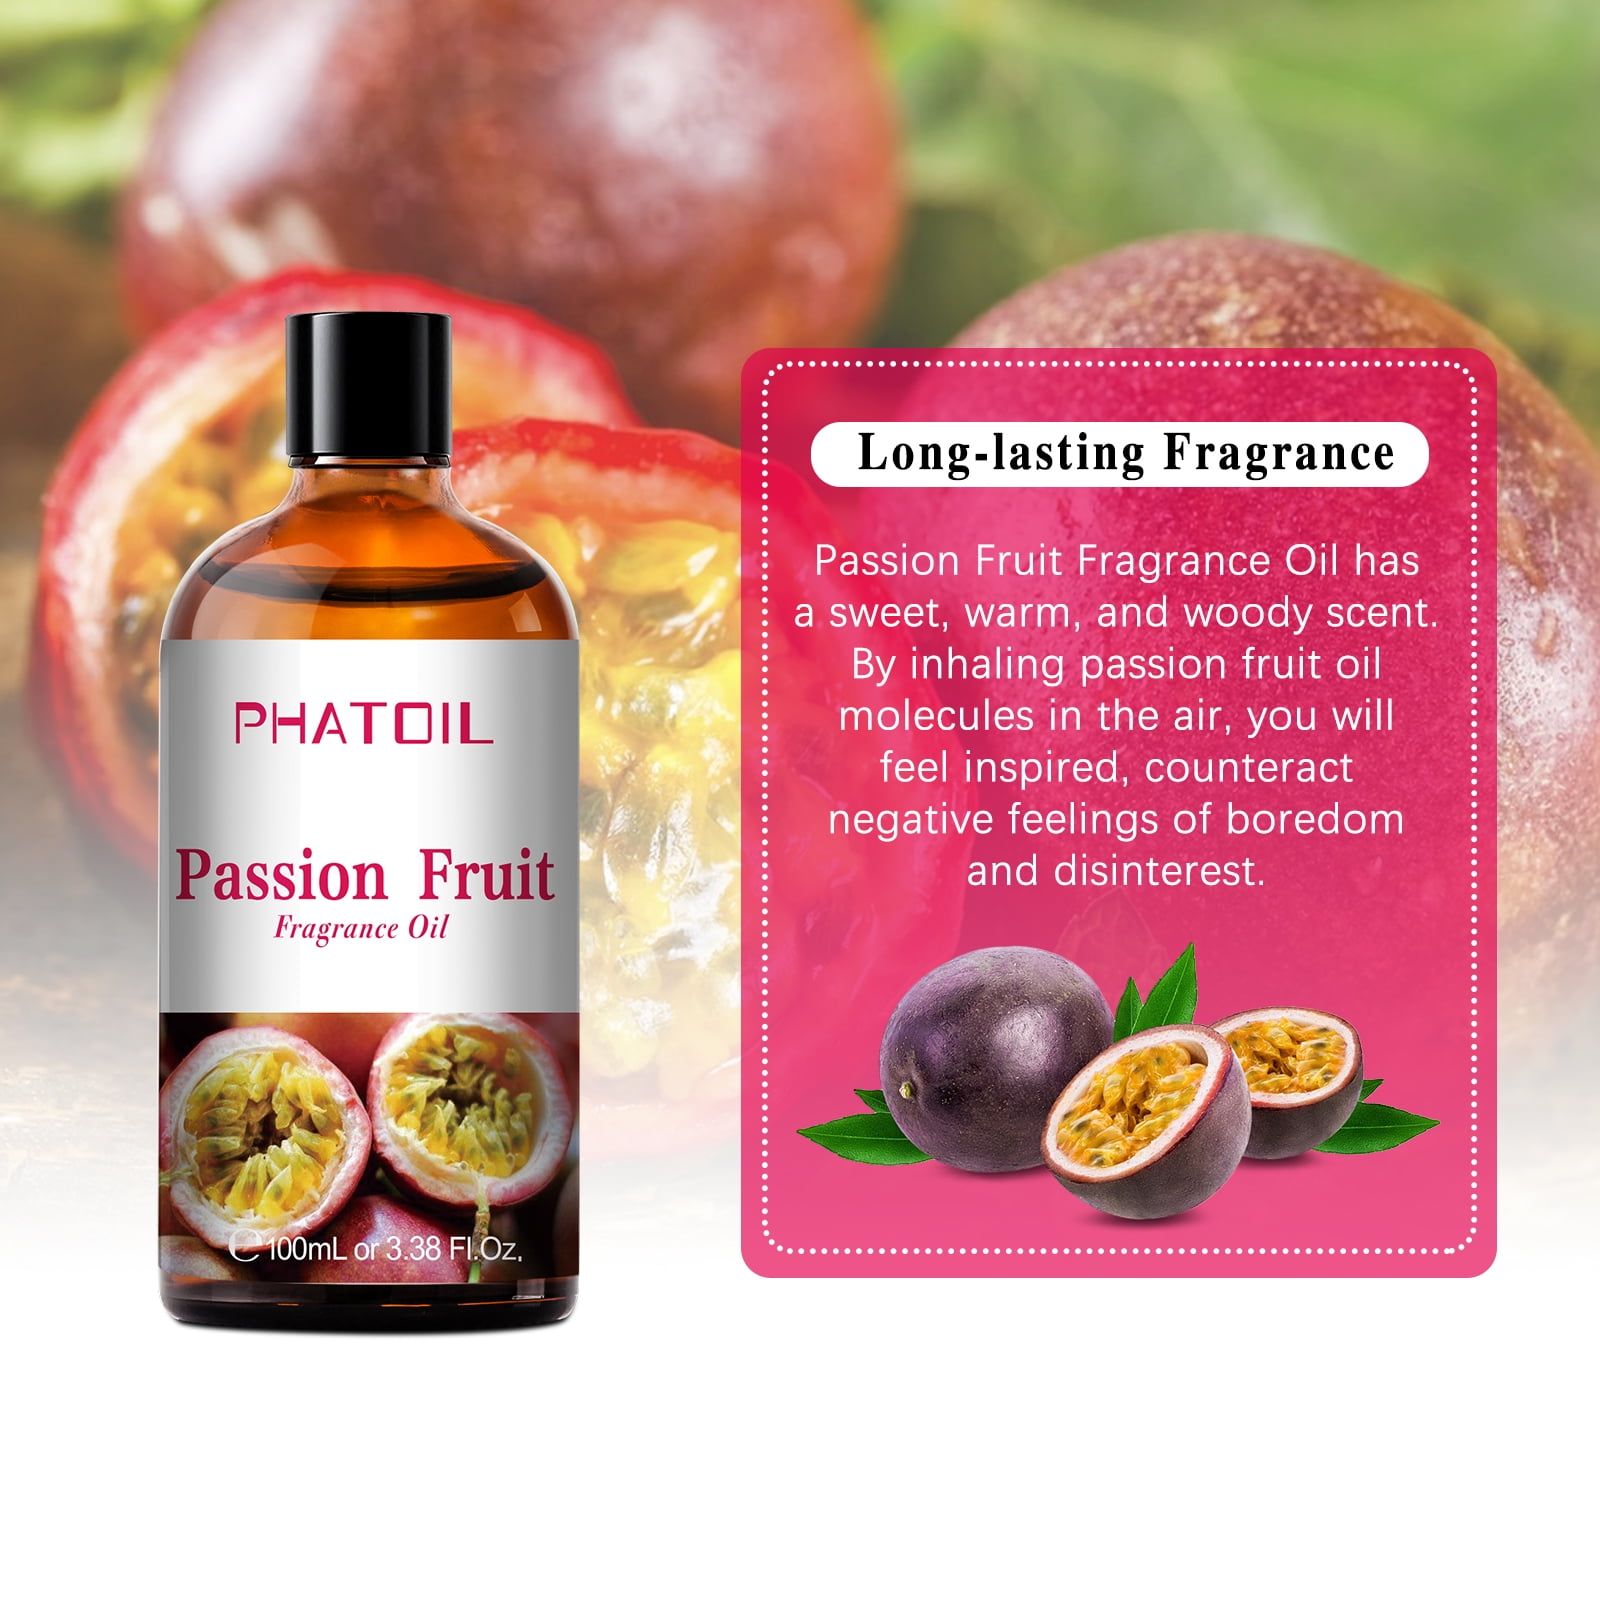 PHATOIL 10ml Pure Mango Fruit Fragrance Essential Oil Diffuser Strawberry  Watermelon Musk Banana Coconut Aroma for Candle Soap Making With Dropper